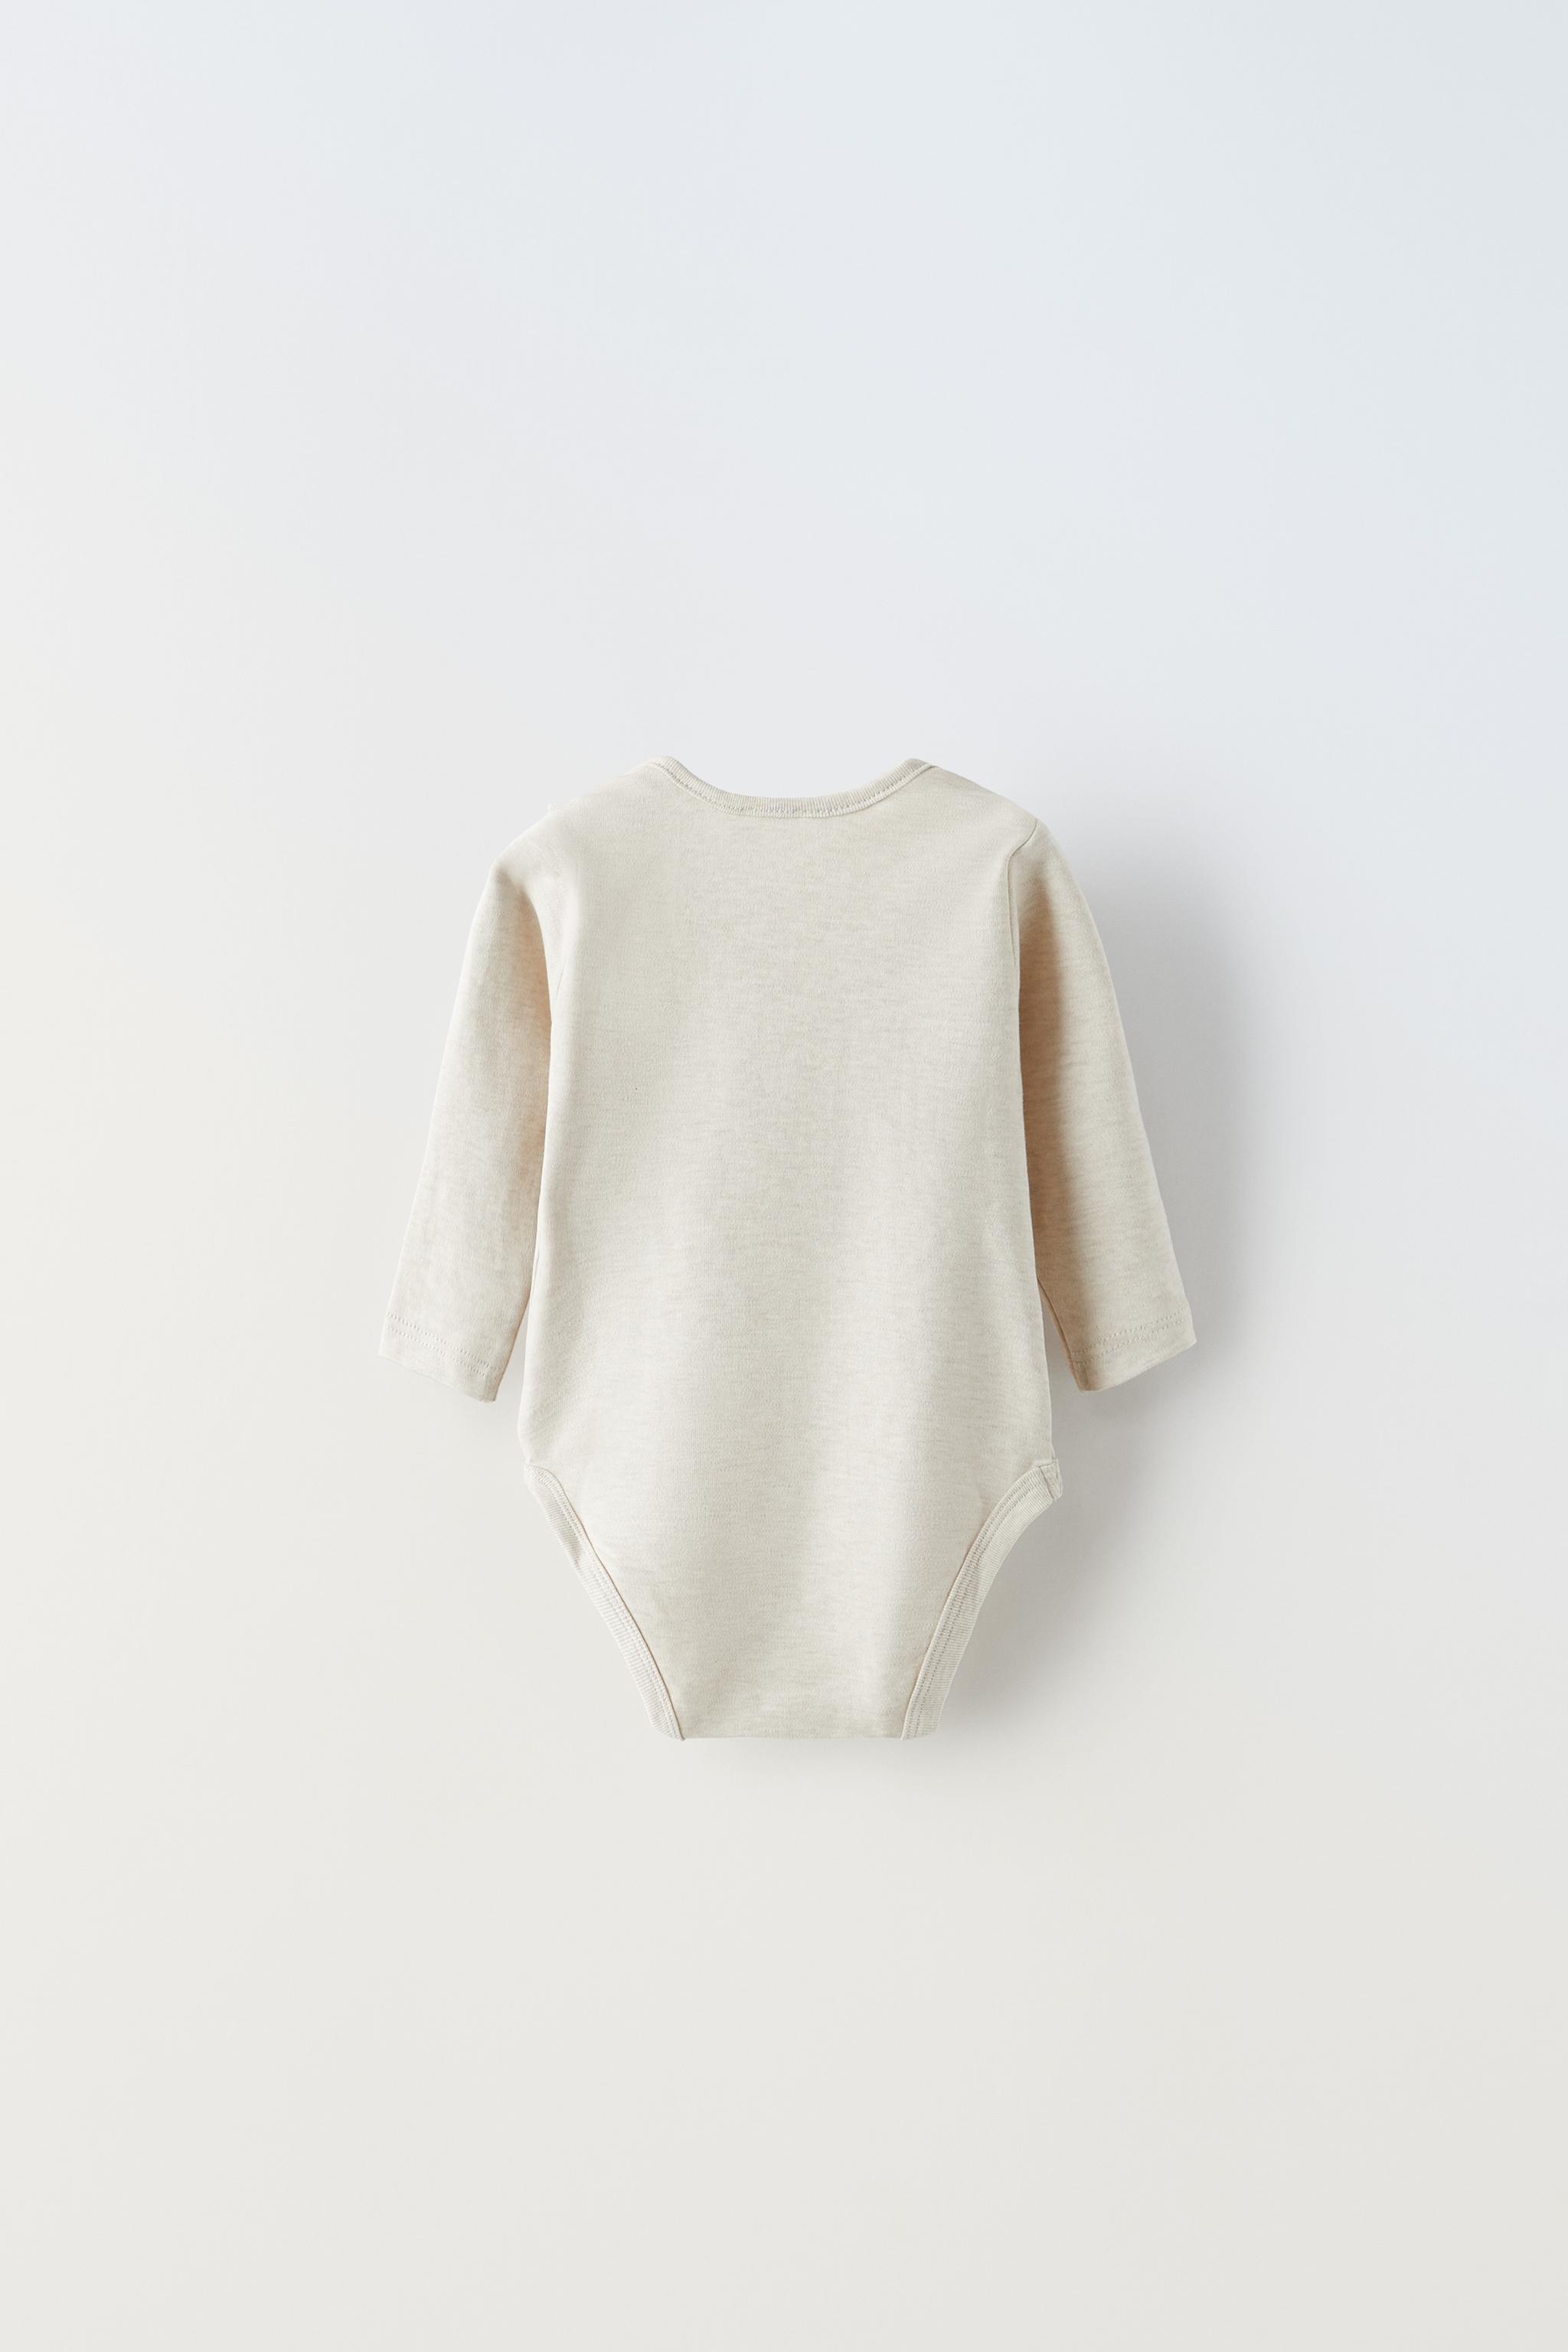 Zara basic everyone needs this autumn 🤎 this bodysuit fits like a